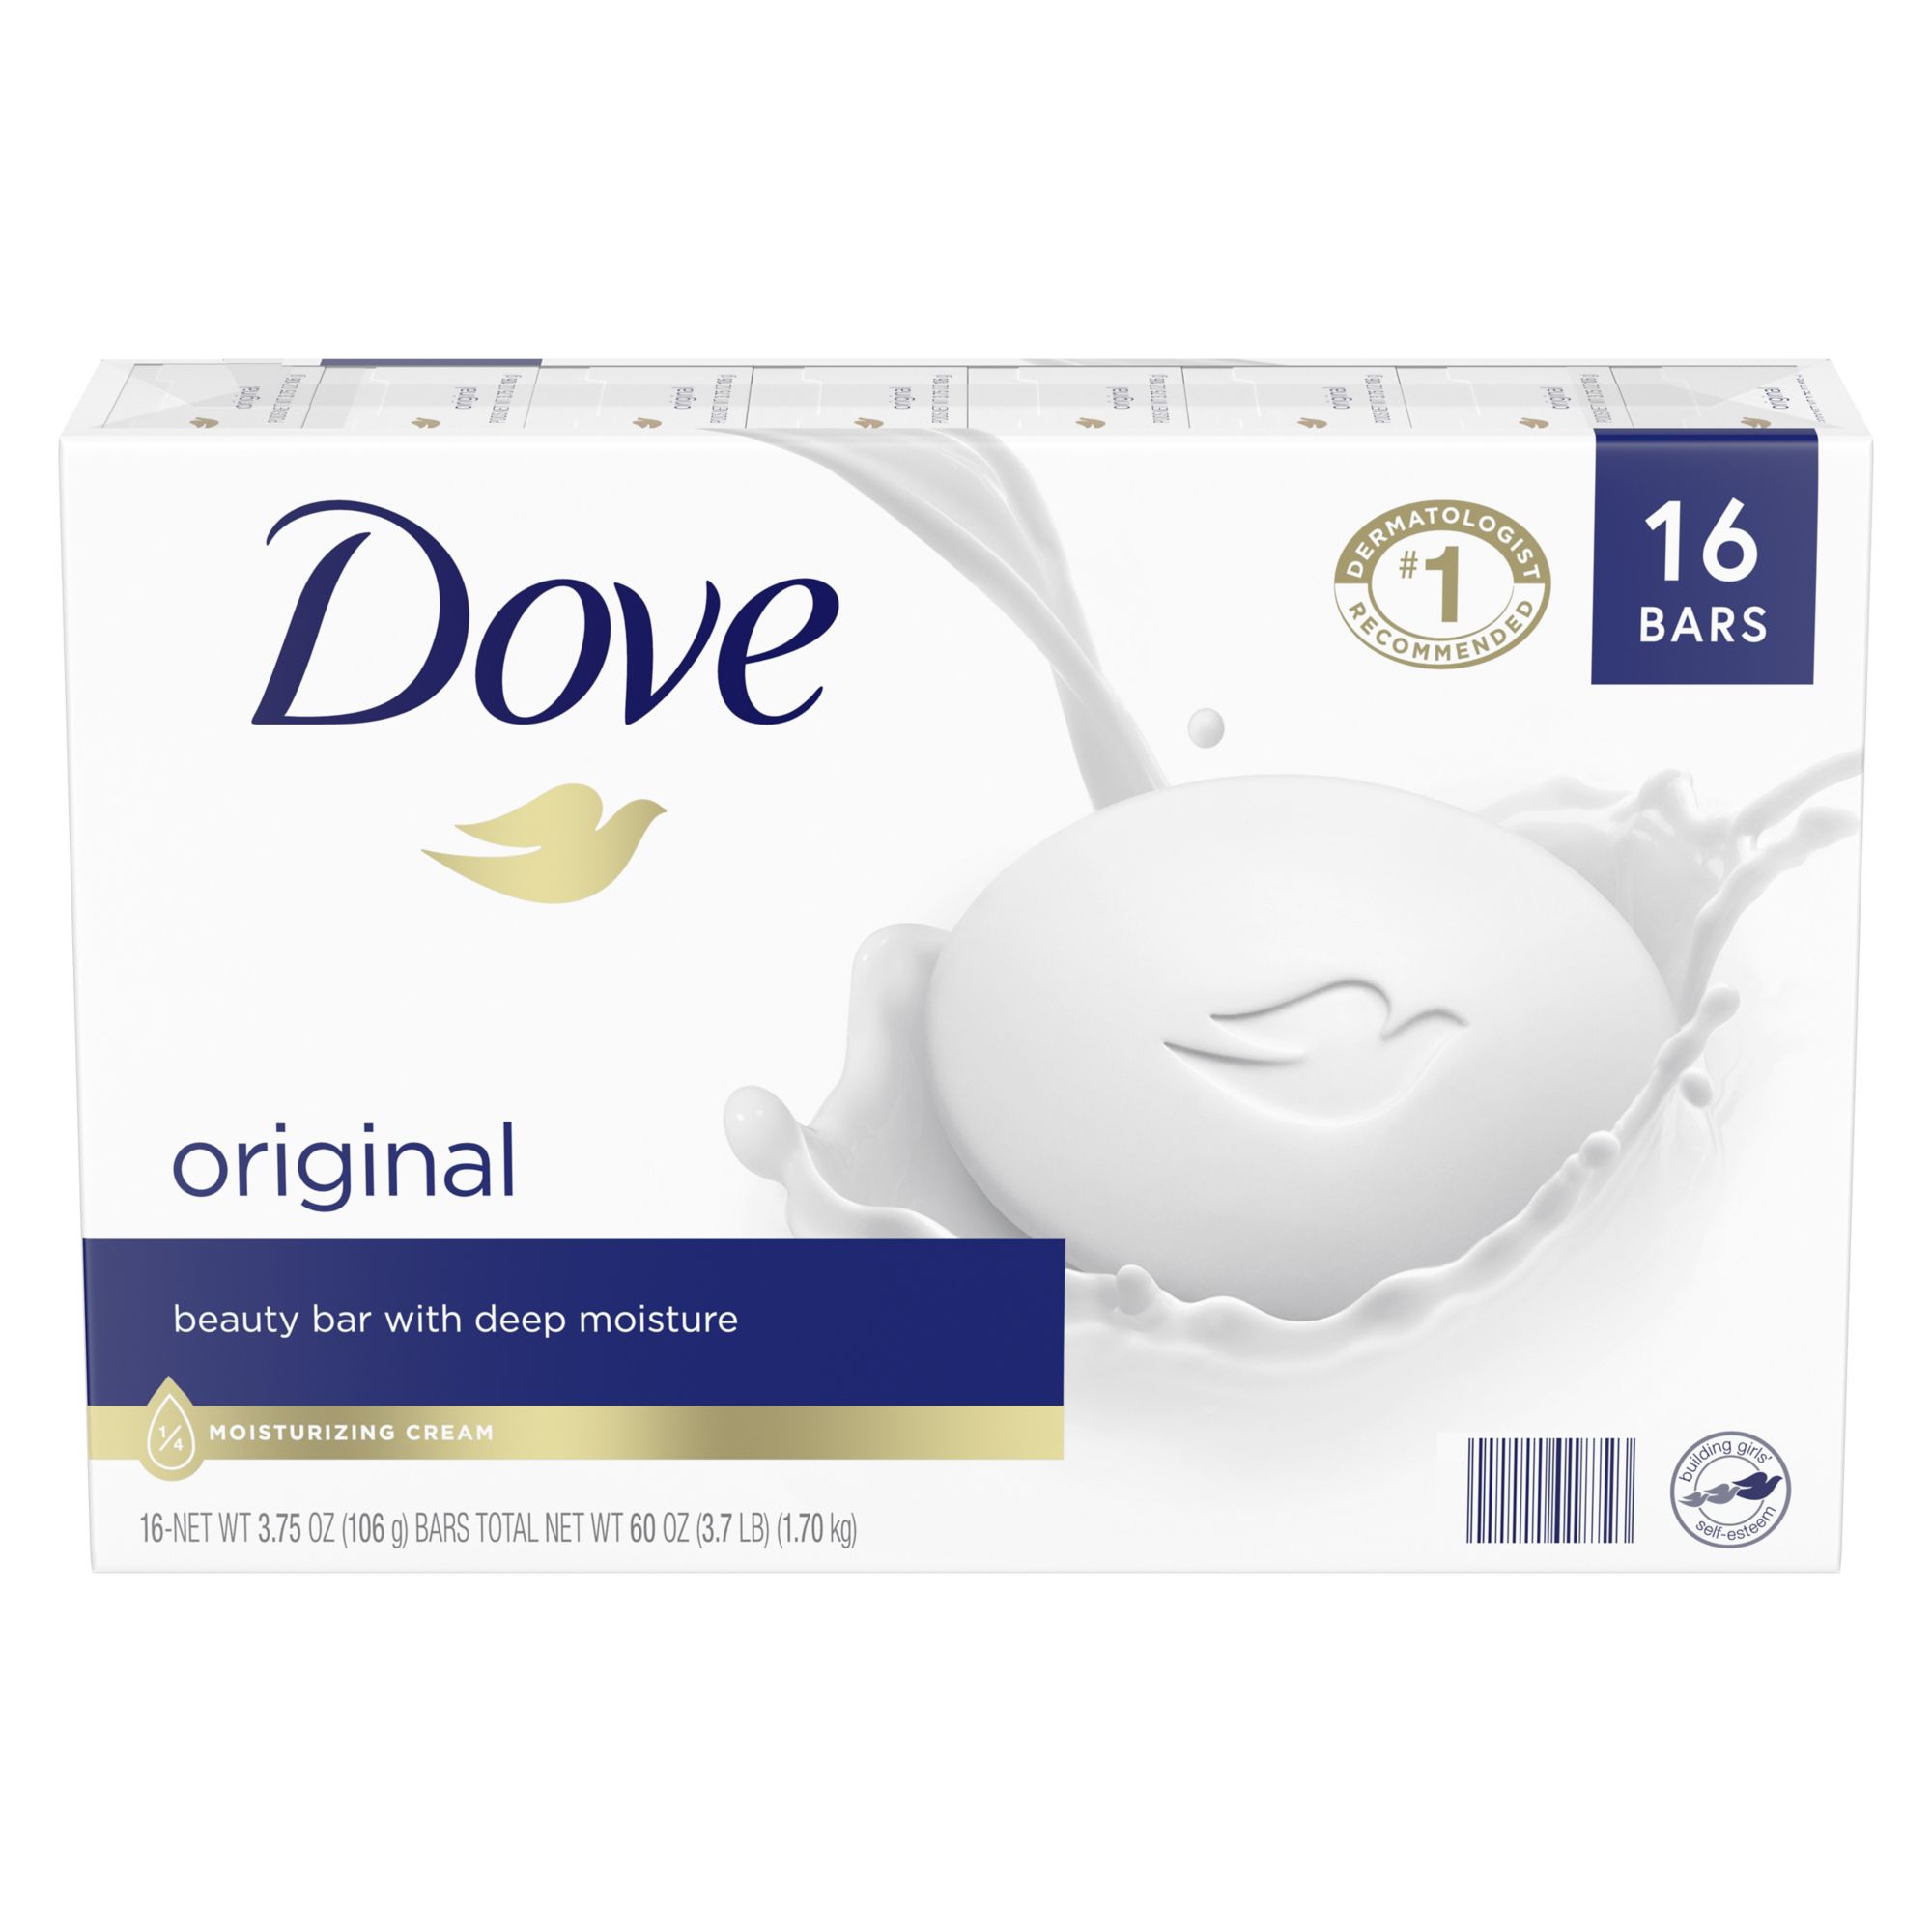 Dove Men+Care Body and Face Bar, Deep Clean - 4 oz, 6 count